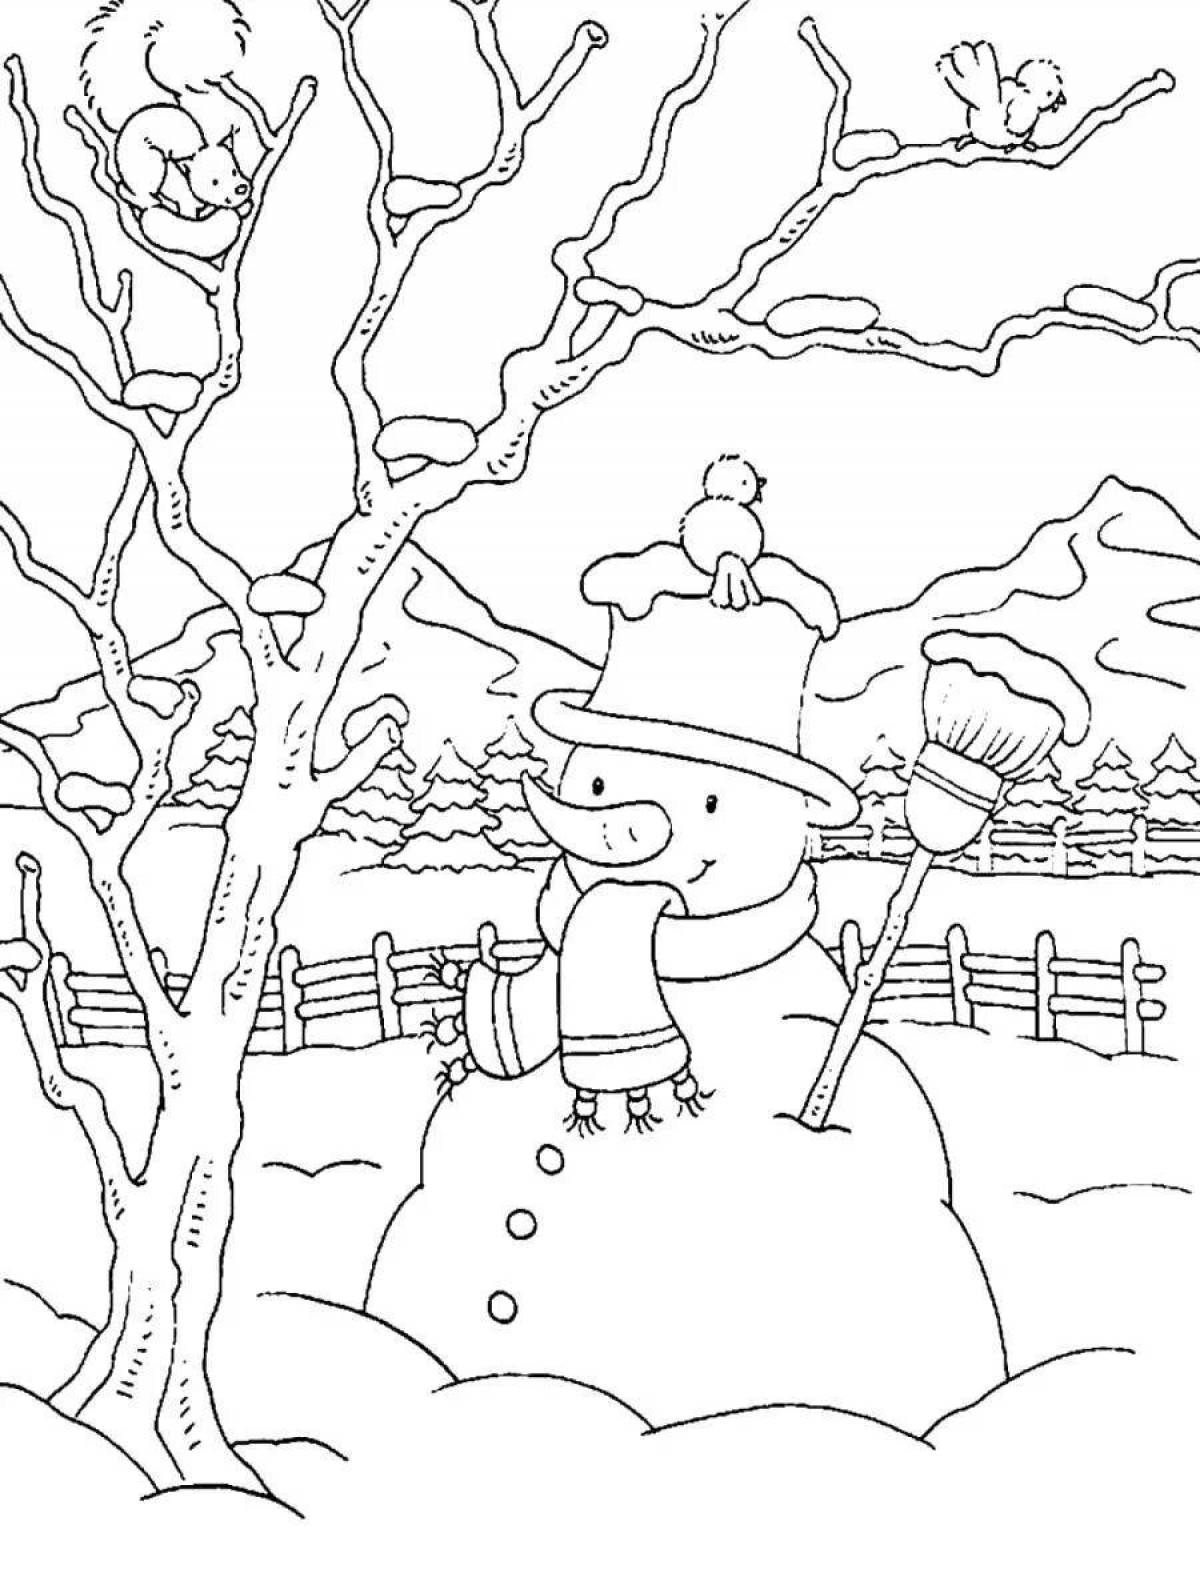 Fantastic winter landscape coloring book for children 10 years old